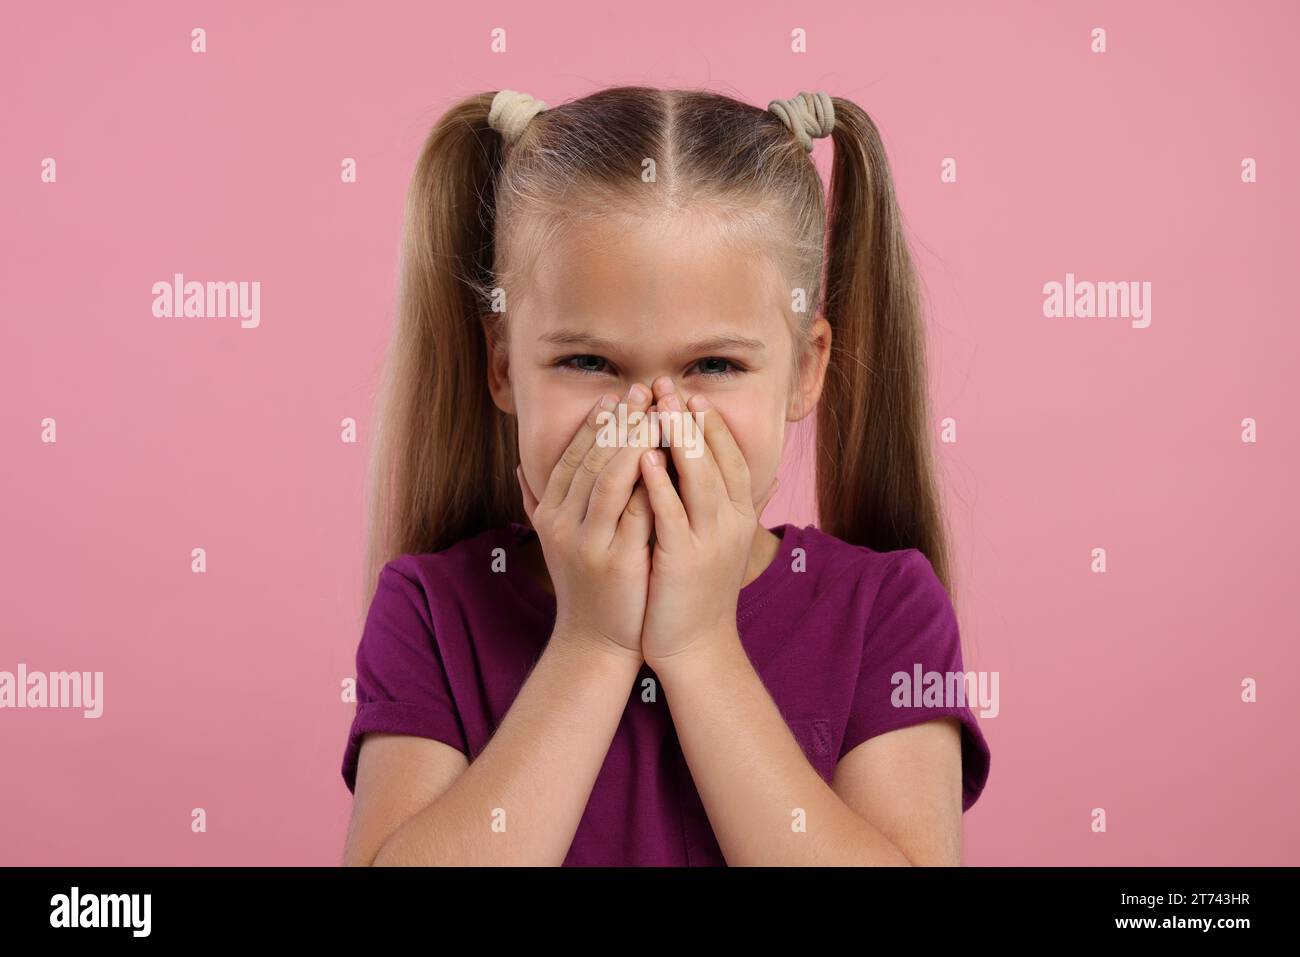 Embarrassed little girl covering her mouth with hands on pink background Stock Photo